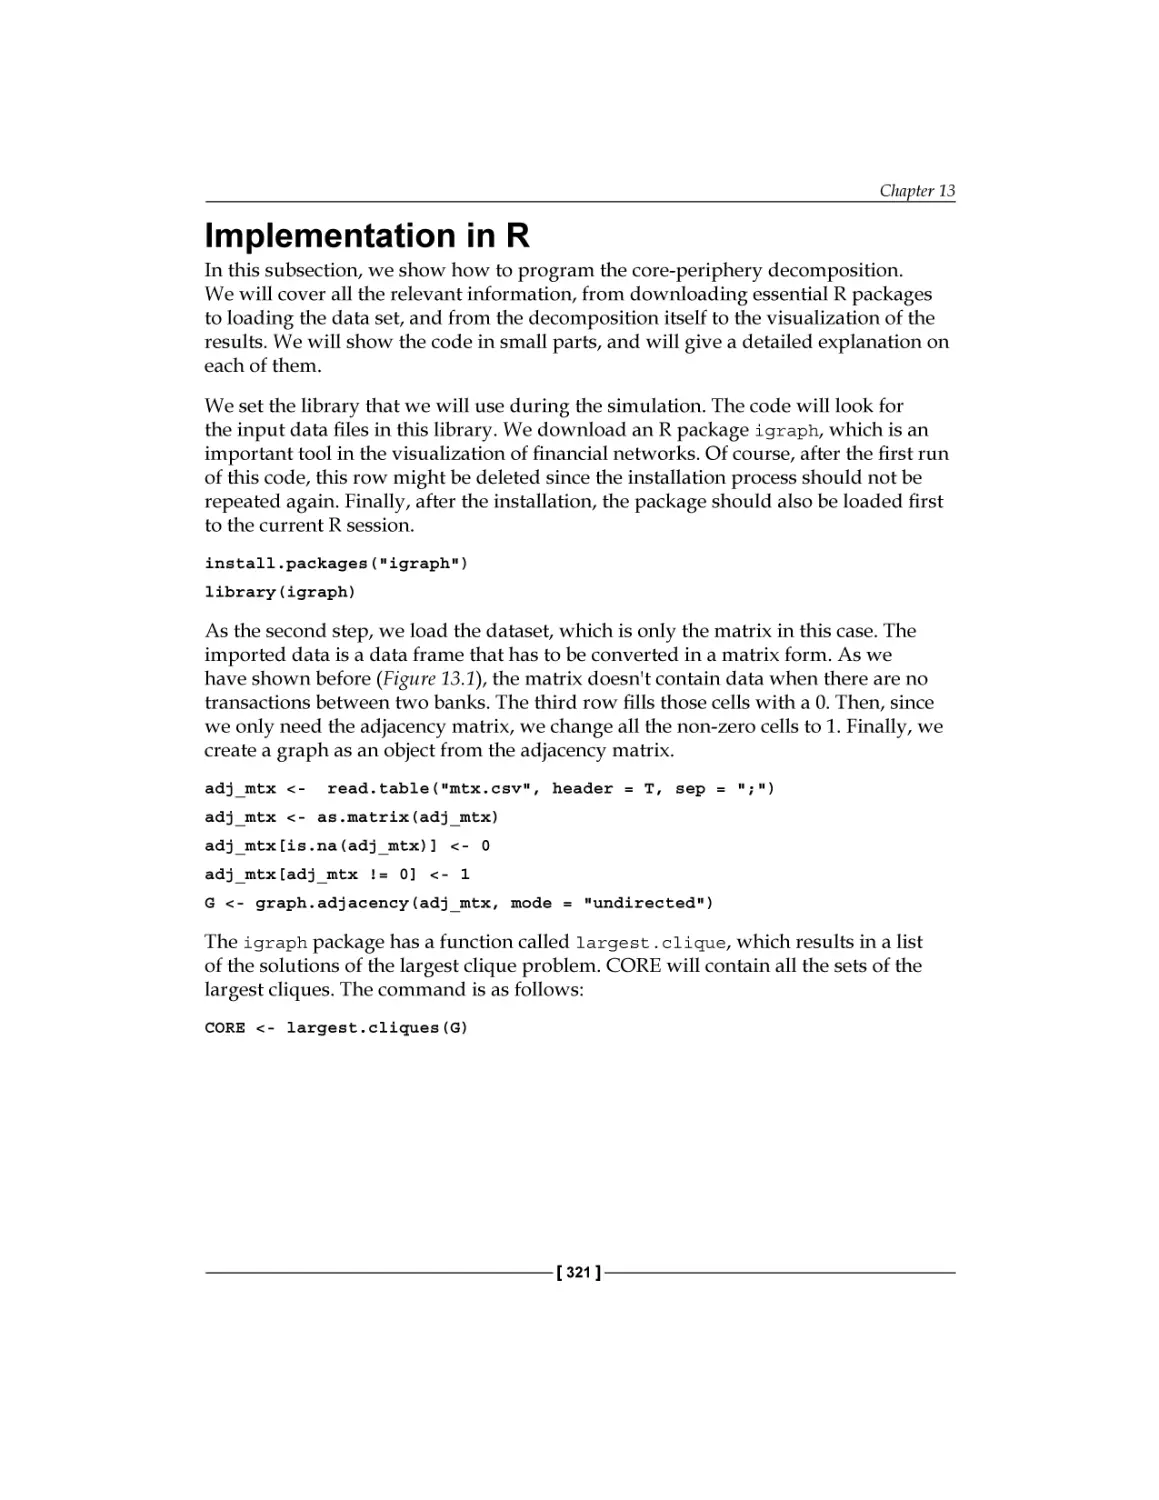 Implementation in R